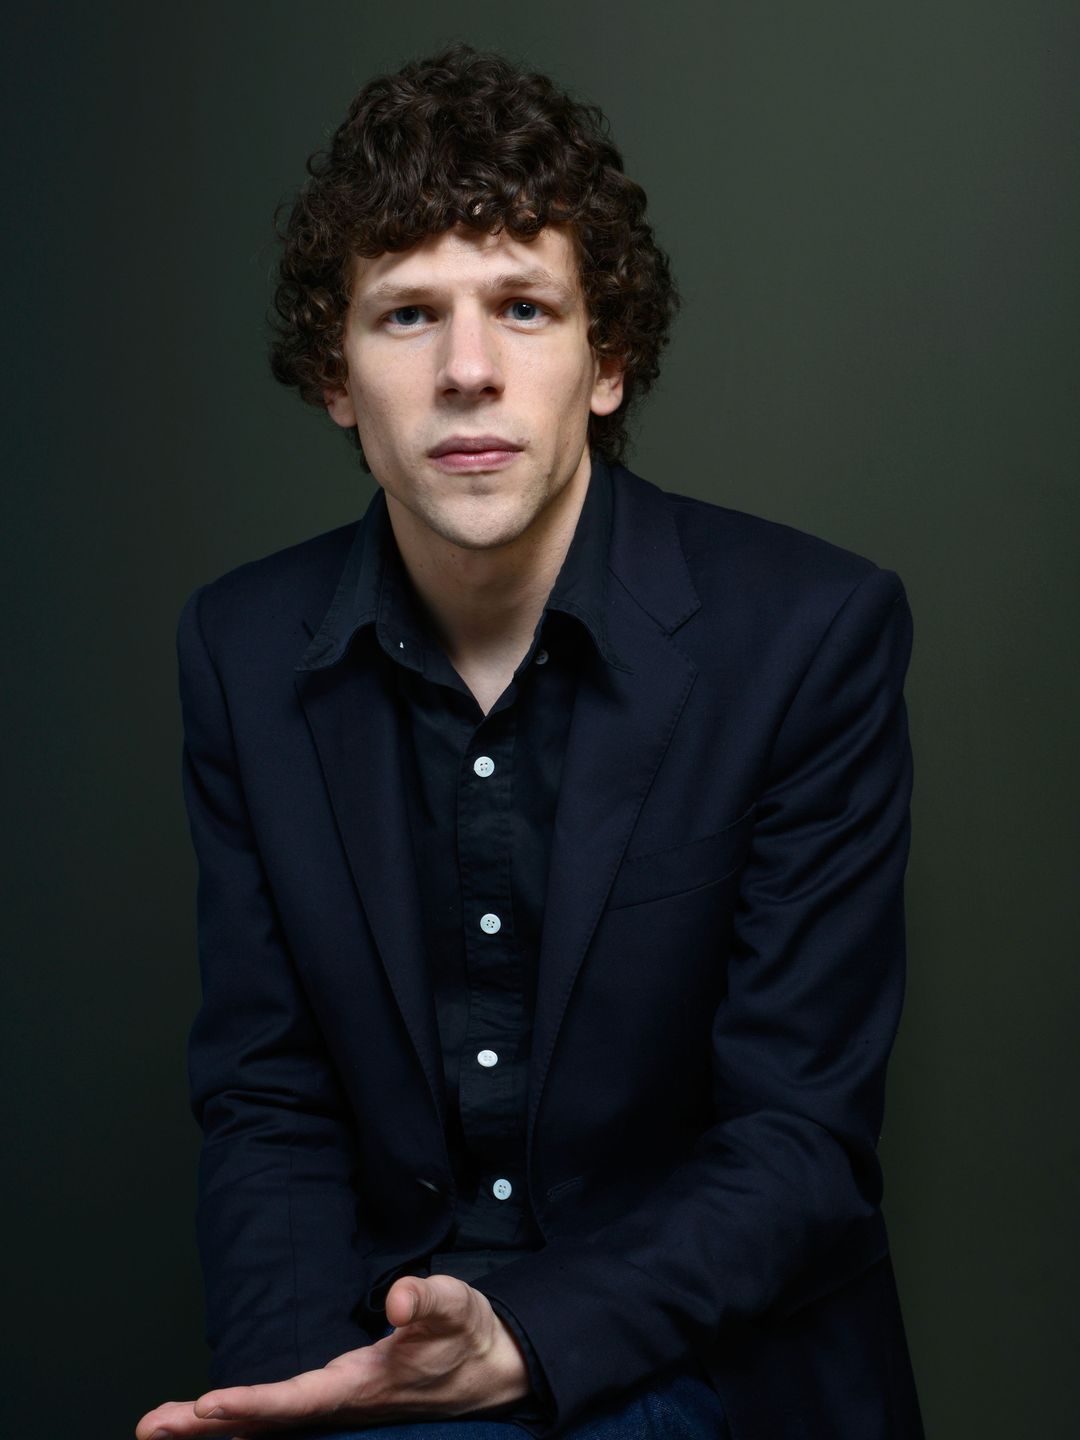 Jesse Eisenberg does he have a wife